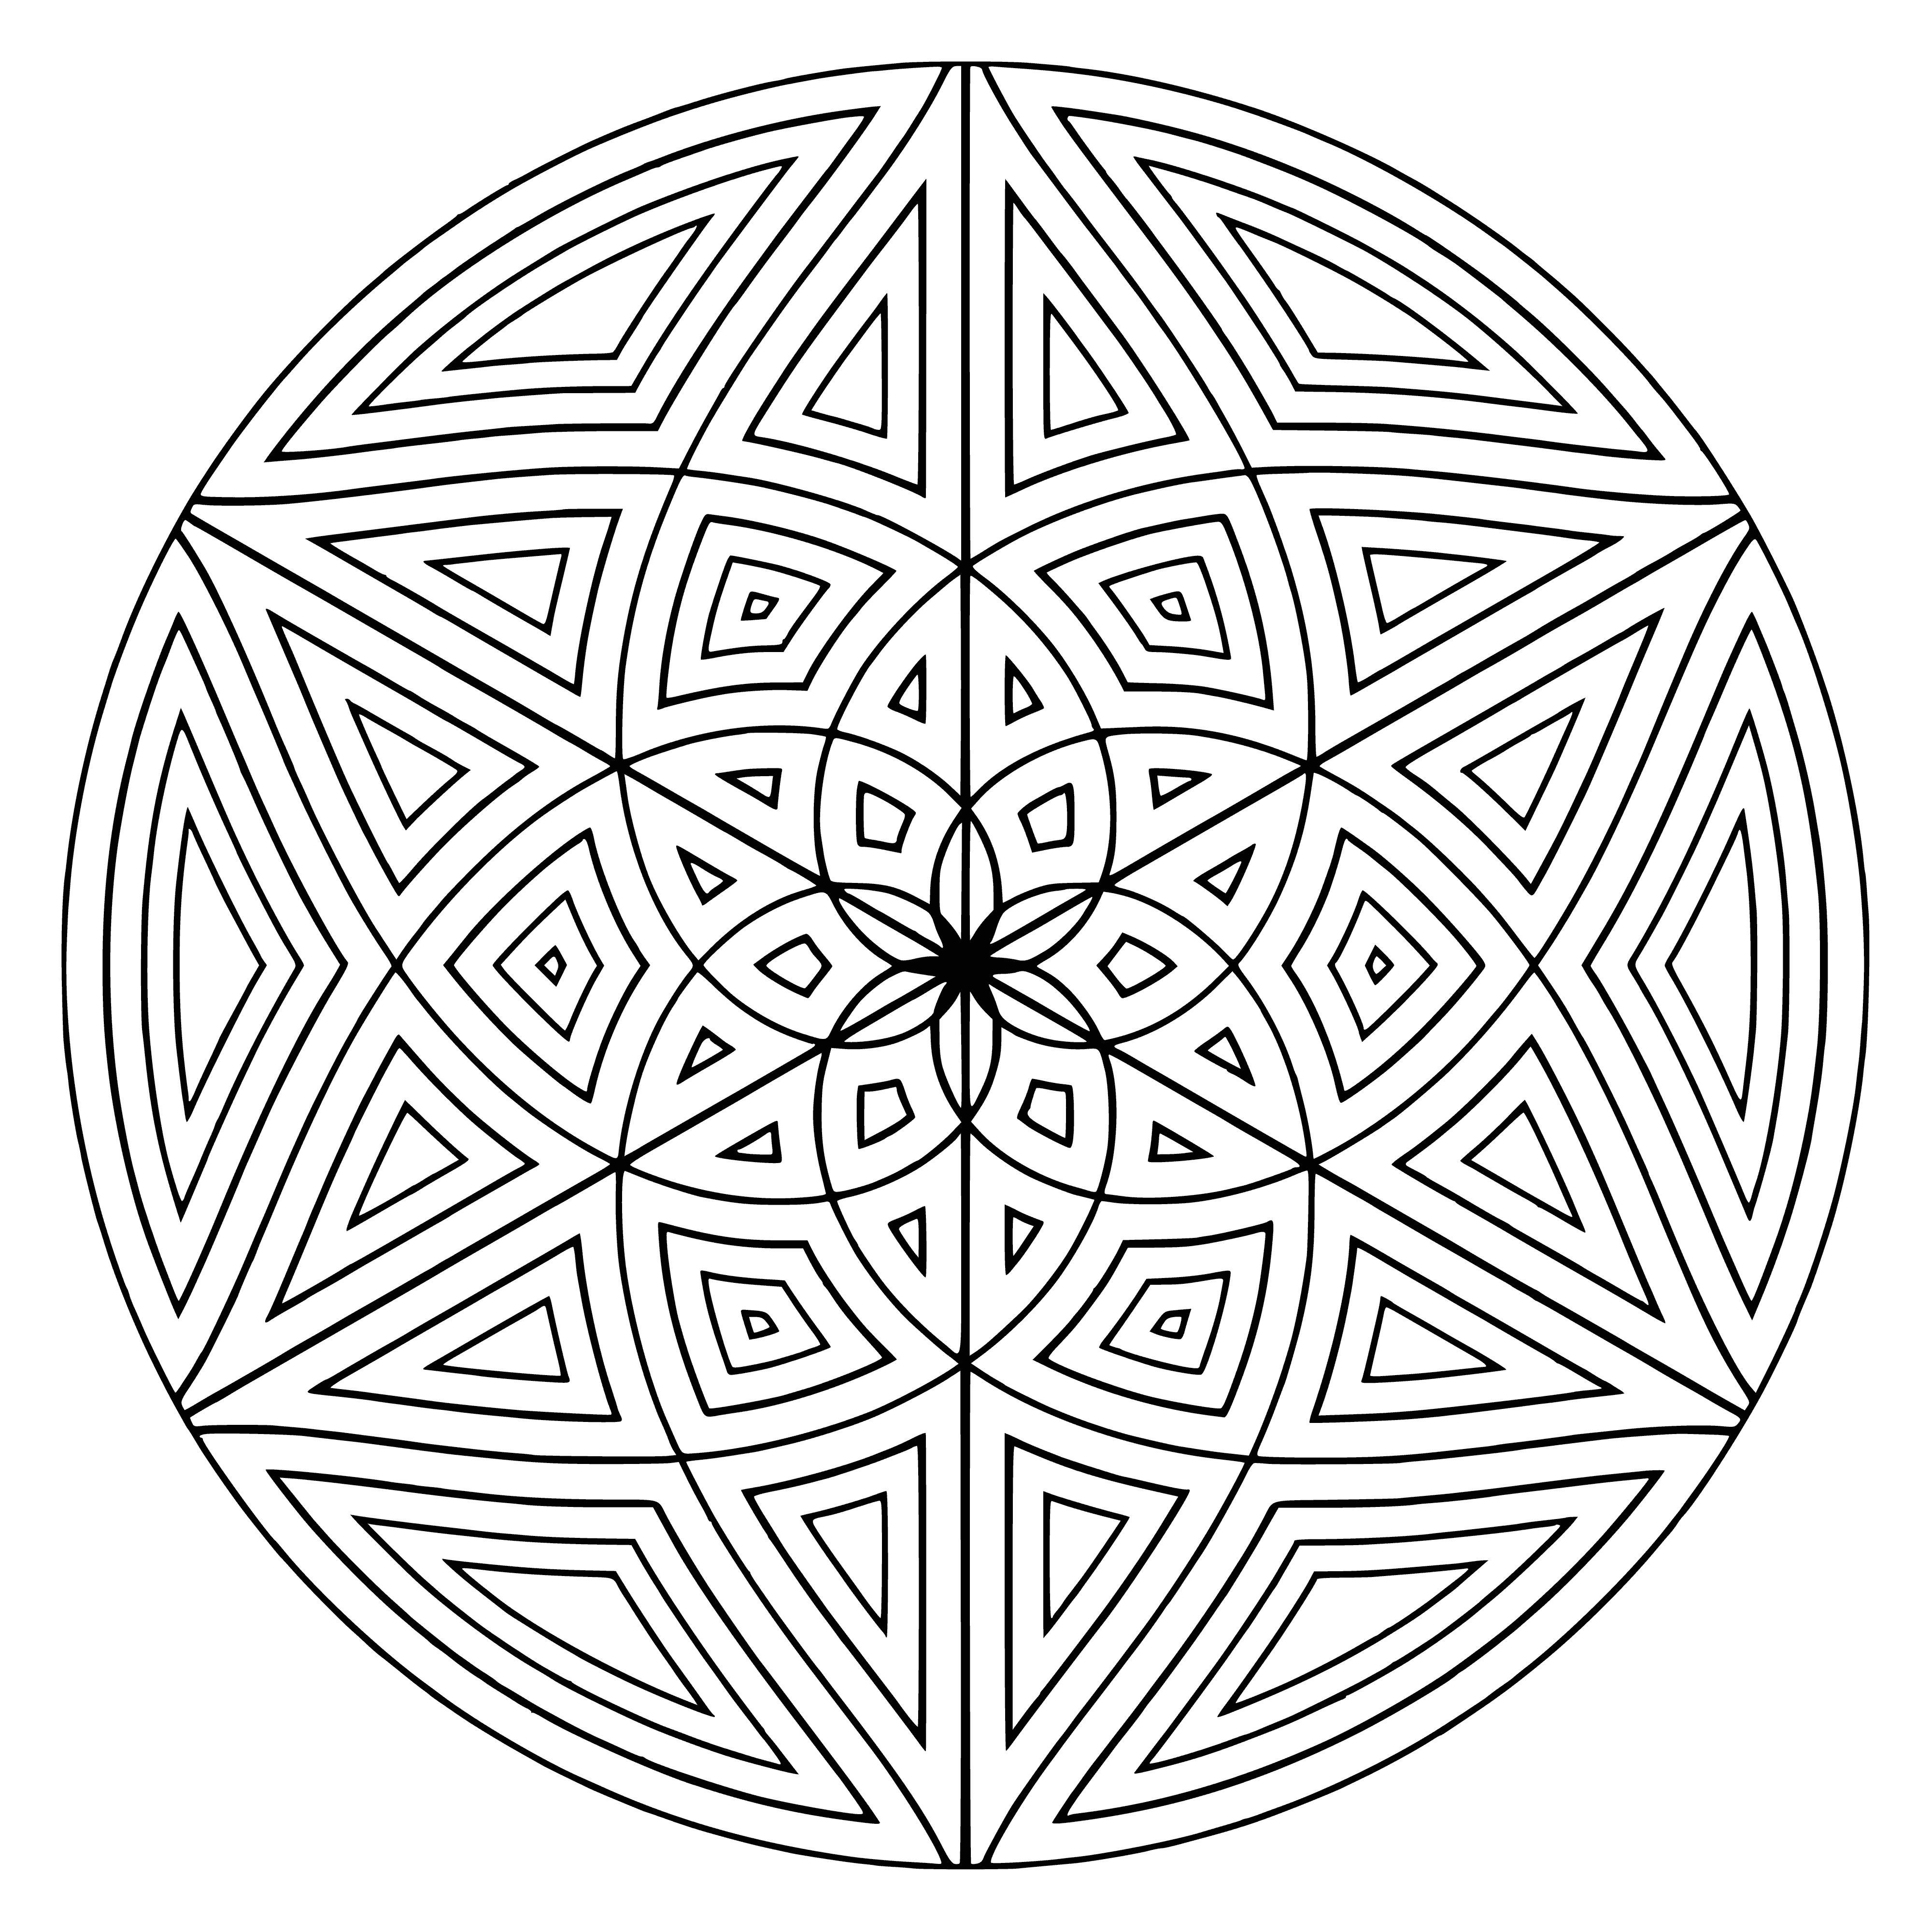 coloring page: Design a colorful mandala with different geometric shapes, perfect for those who love to color and use shapes! #mandalas #geometricshapes #coloring